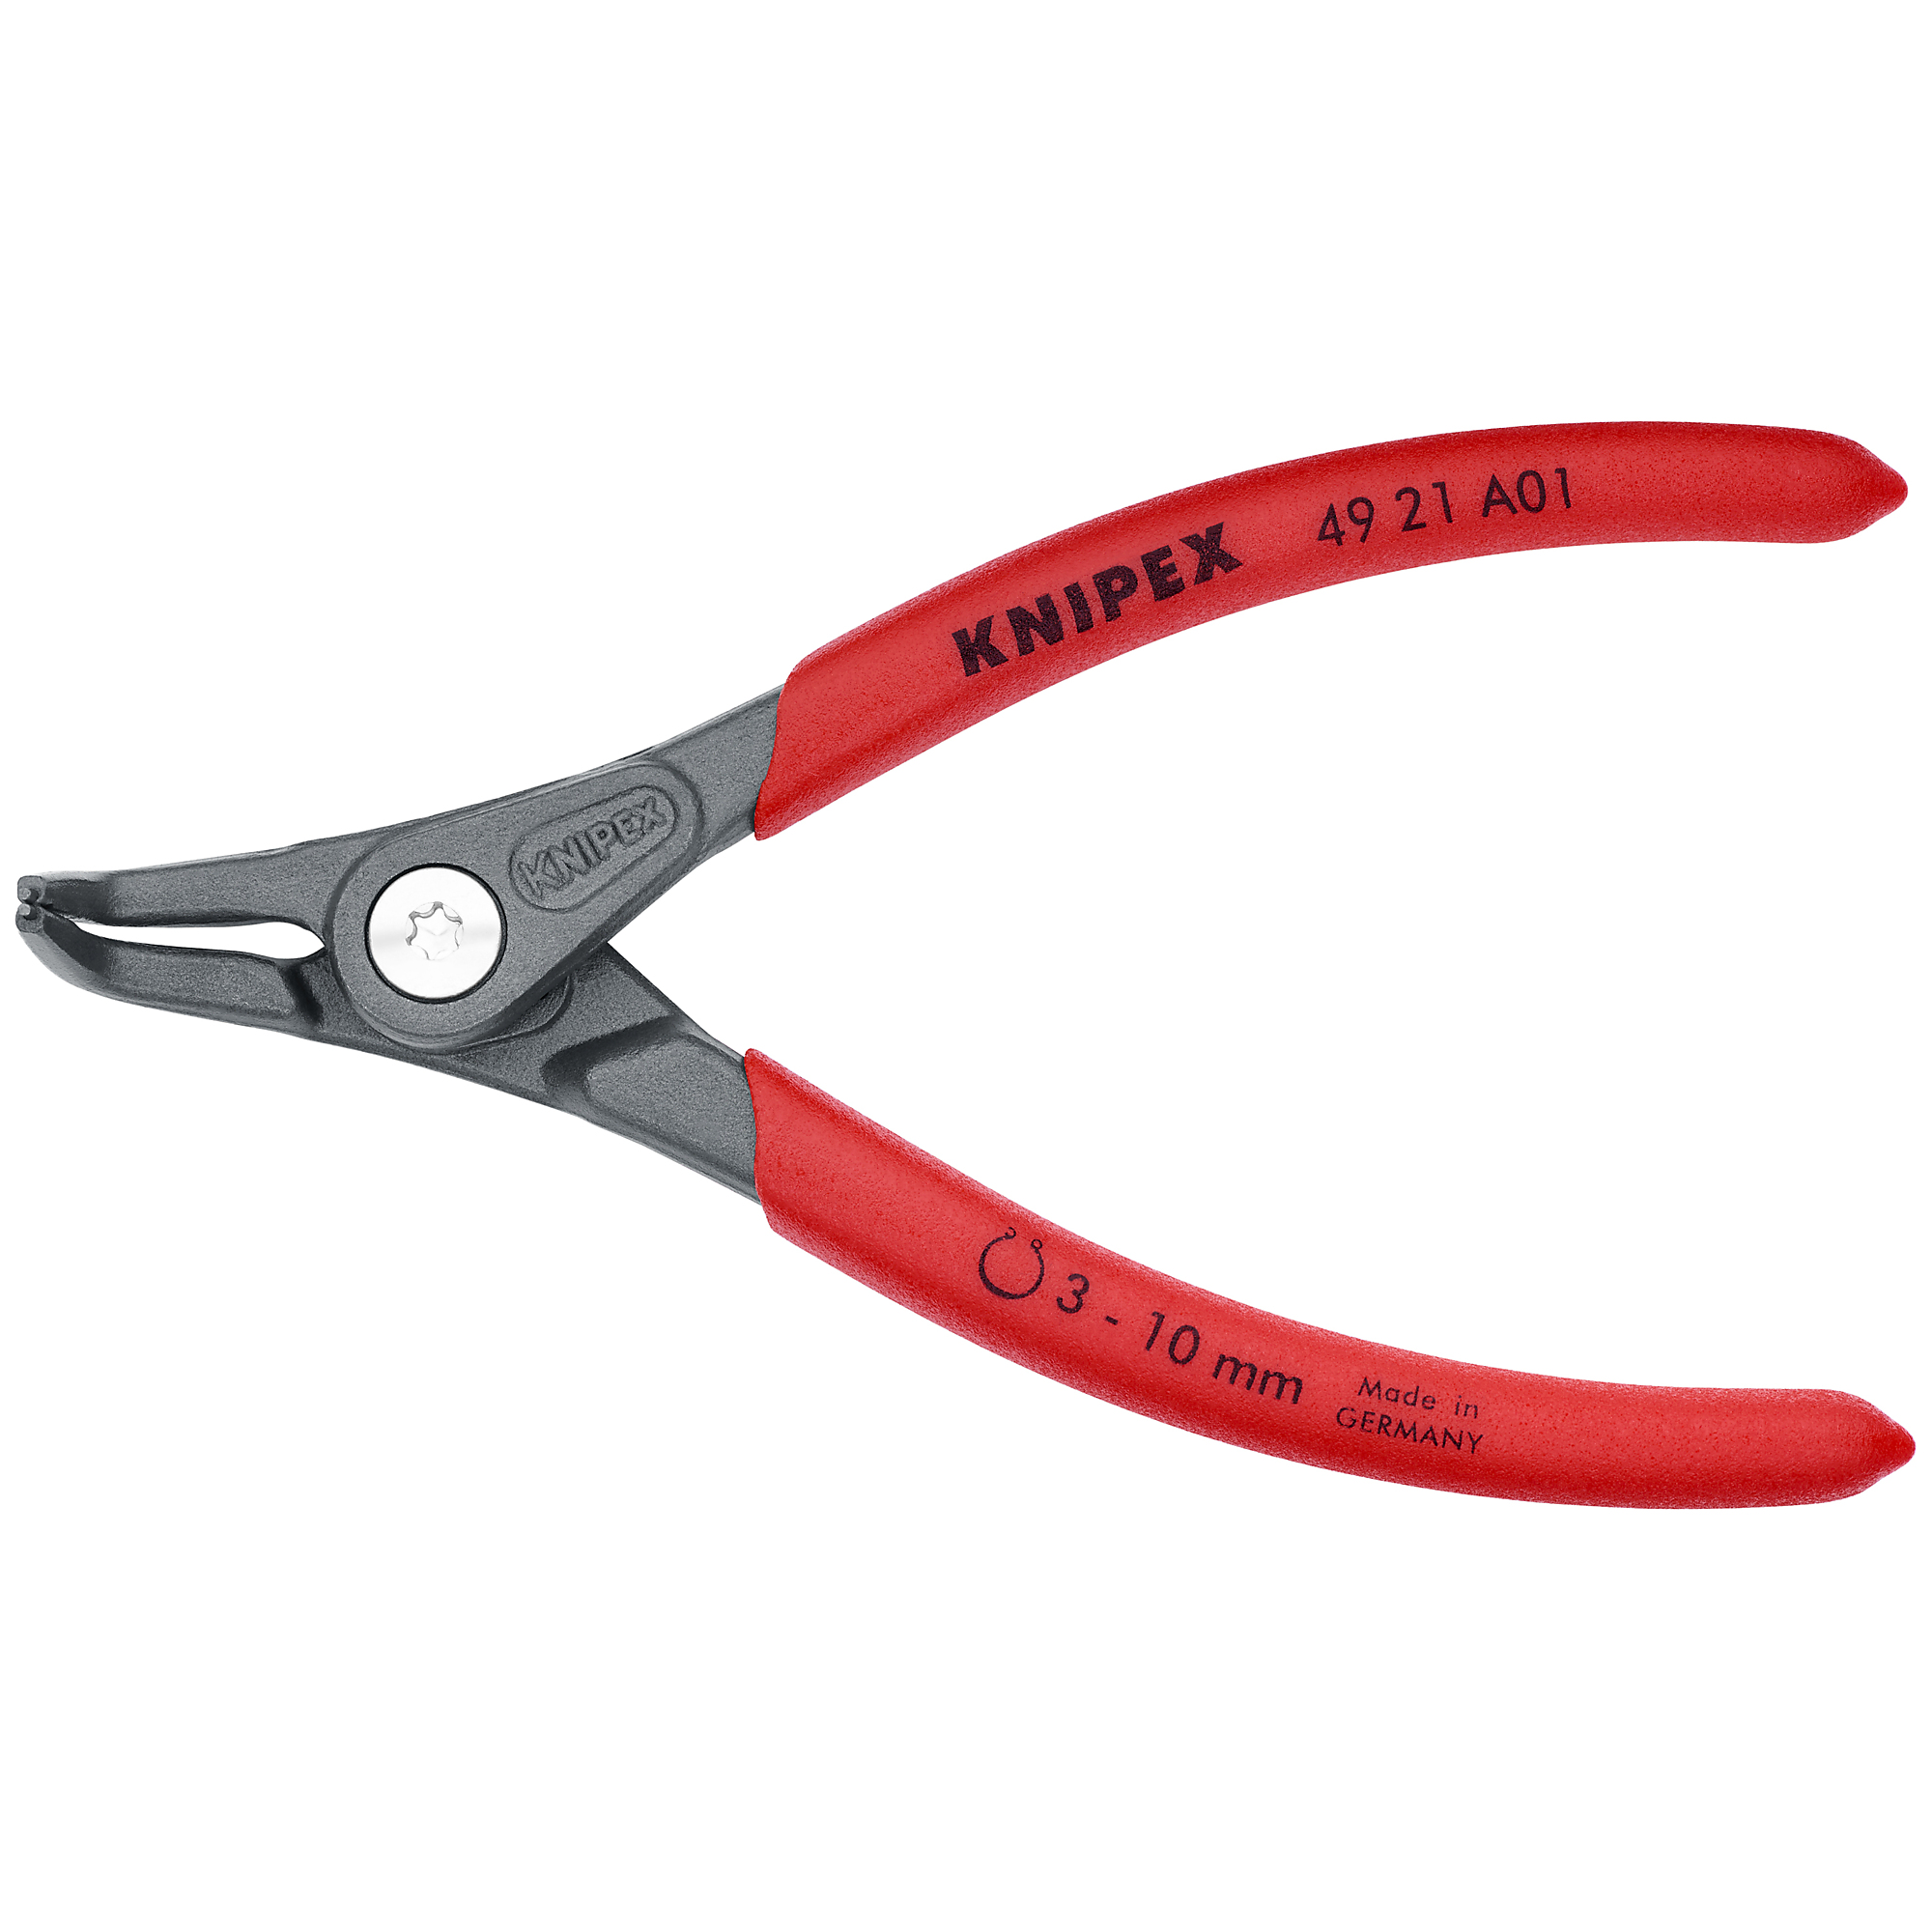 KNIPEX, Ext 90Â° Prec. Snap Ring Pliers, 1/32 tip, 5.125Inch, Pieces (qty.) 1 Material Steel, Model 49 21 A01